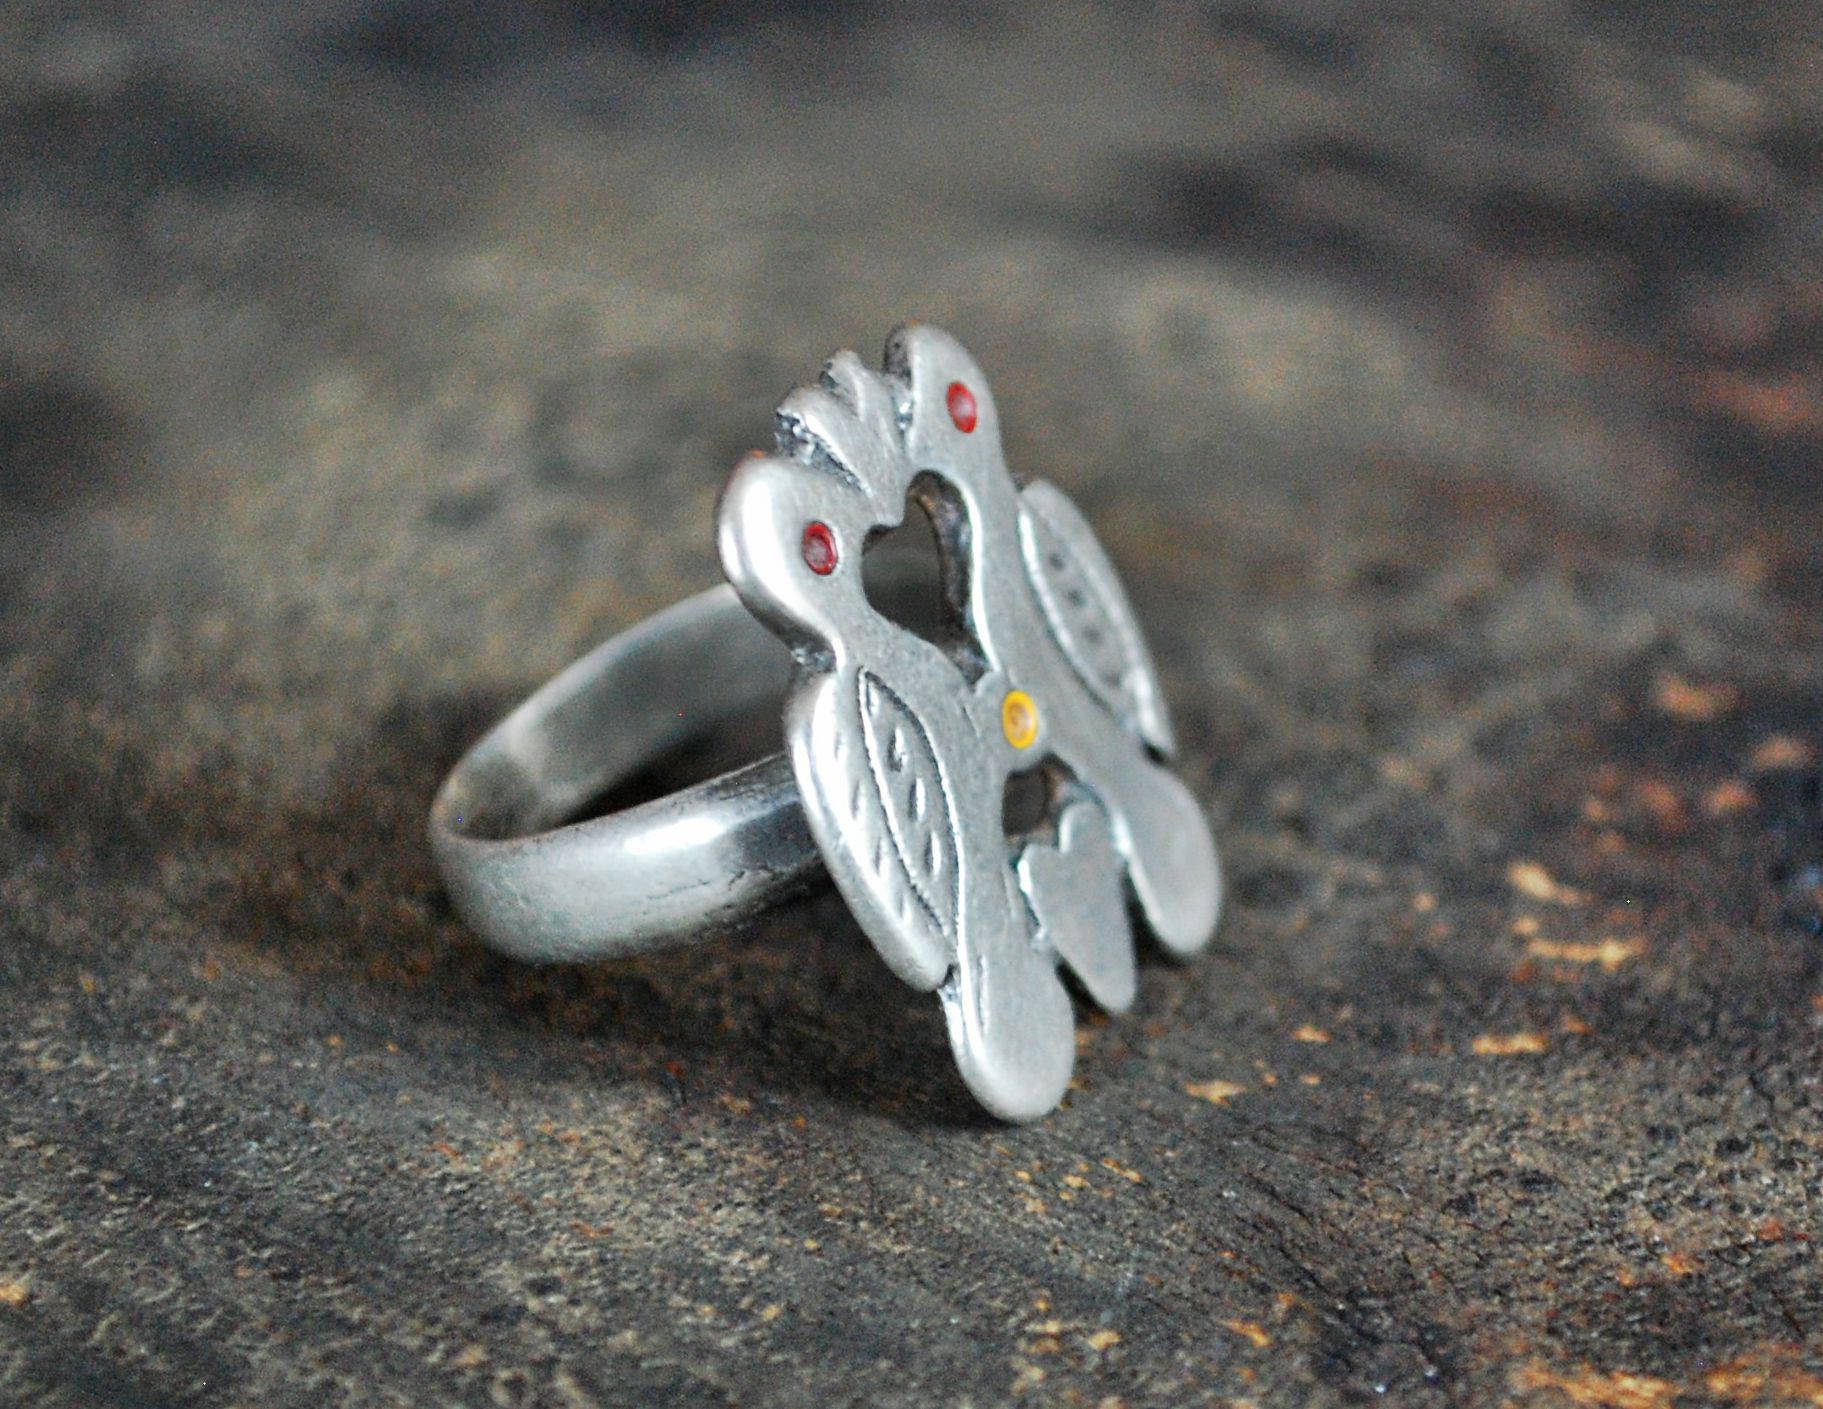 Antique Berber Love Birds Ring - Size 6.5 - Berber Jewelry - Tribal Silver Ring - Berber Ring - Moroccan Jewelry